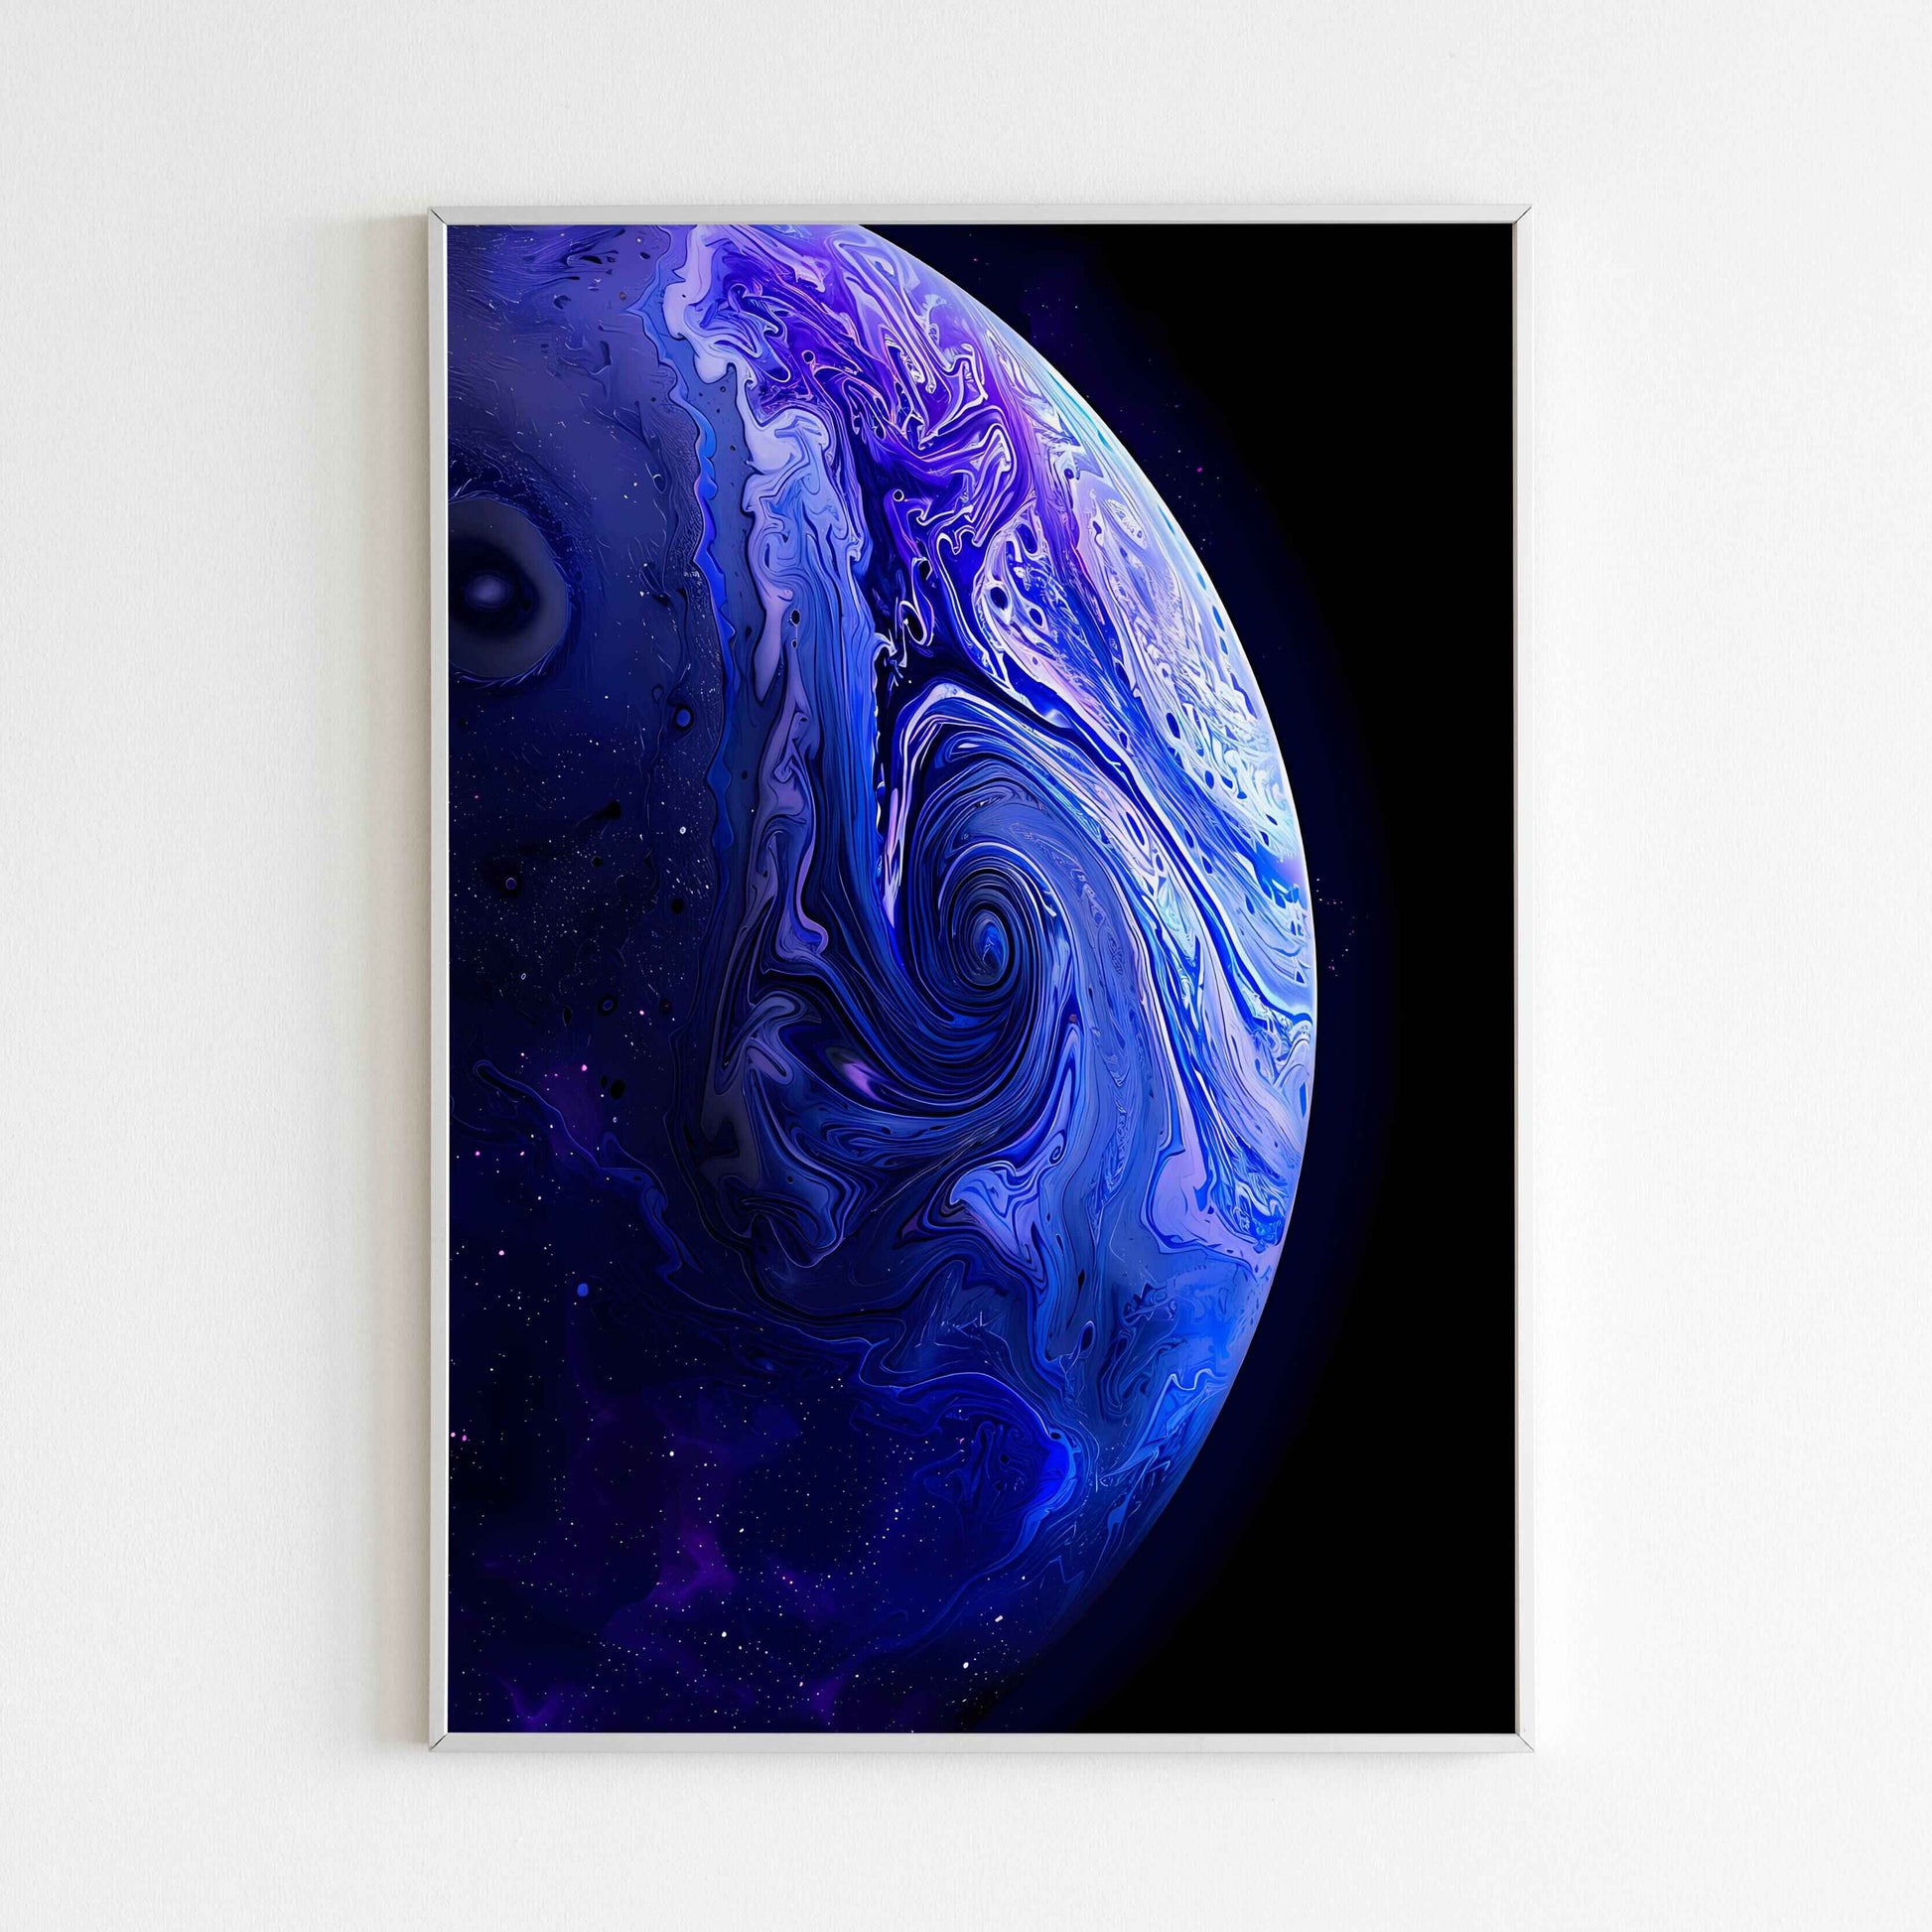 Planet printable poster. Gaze upon a distant planet, sparking your imagination about the universe. Available for purchase as a physical poster or digital download.